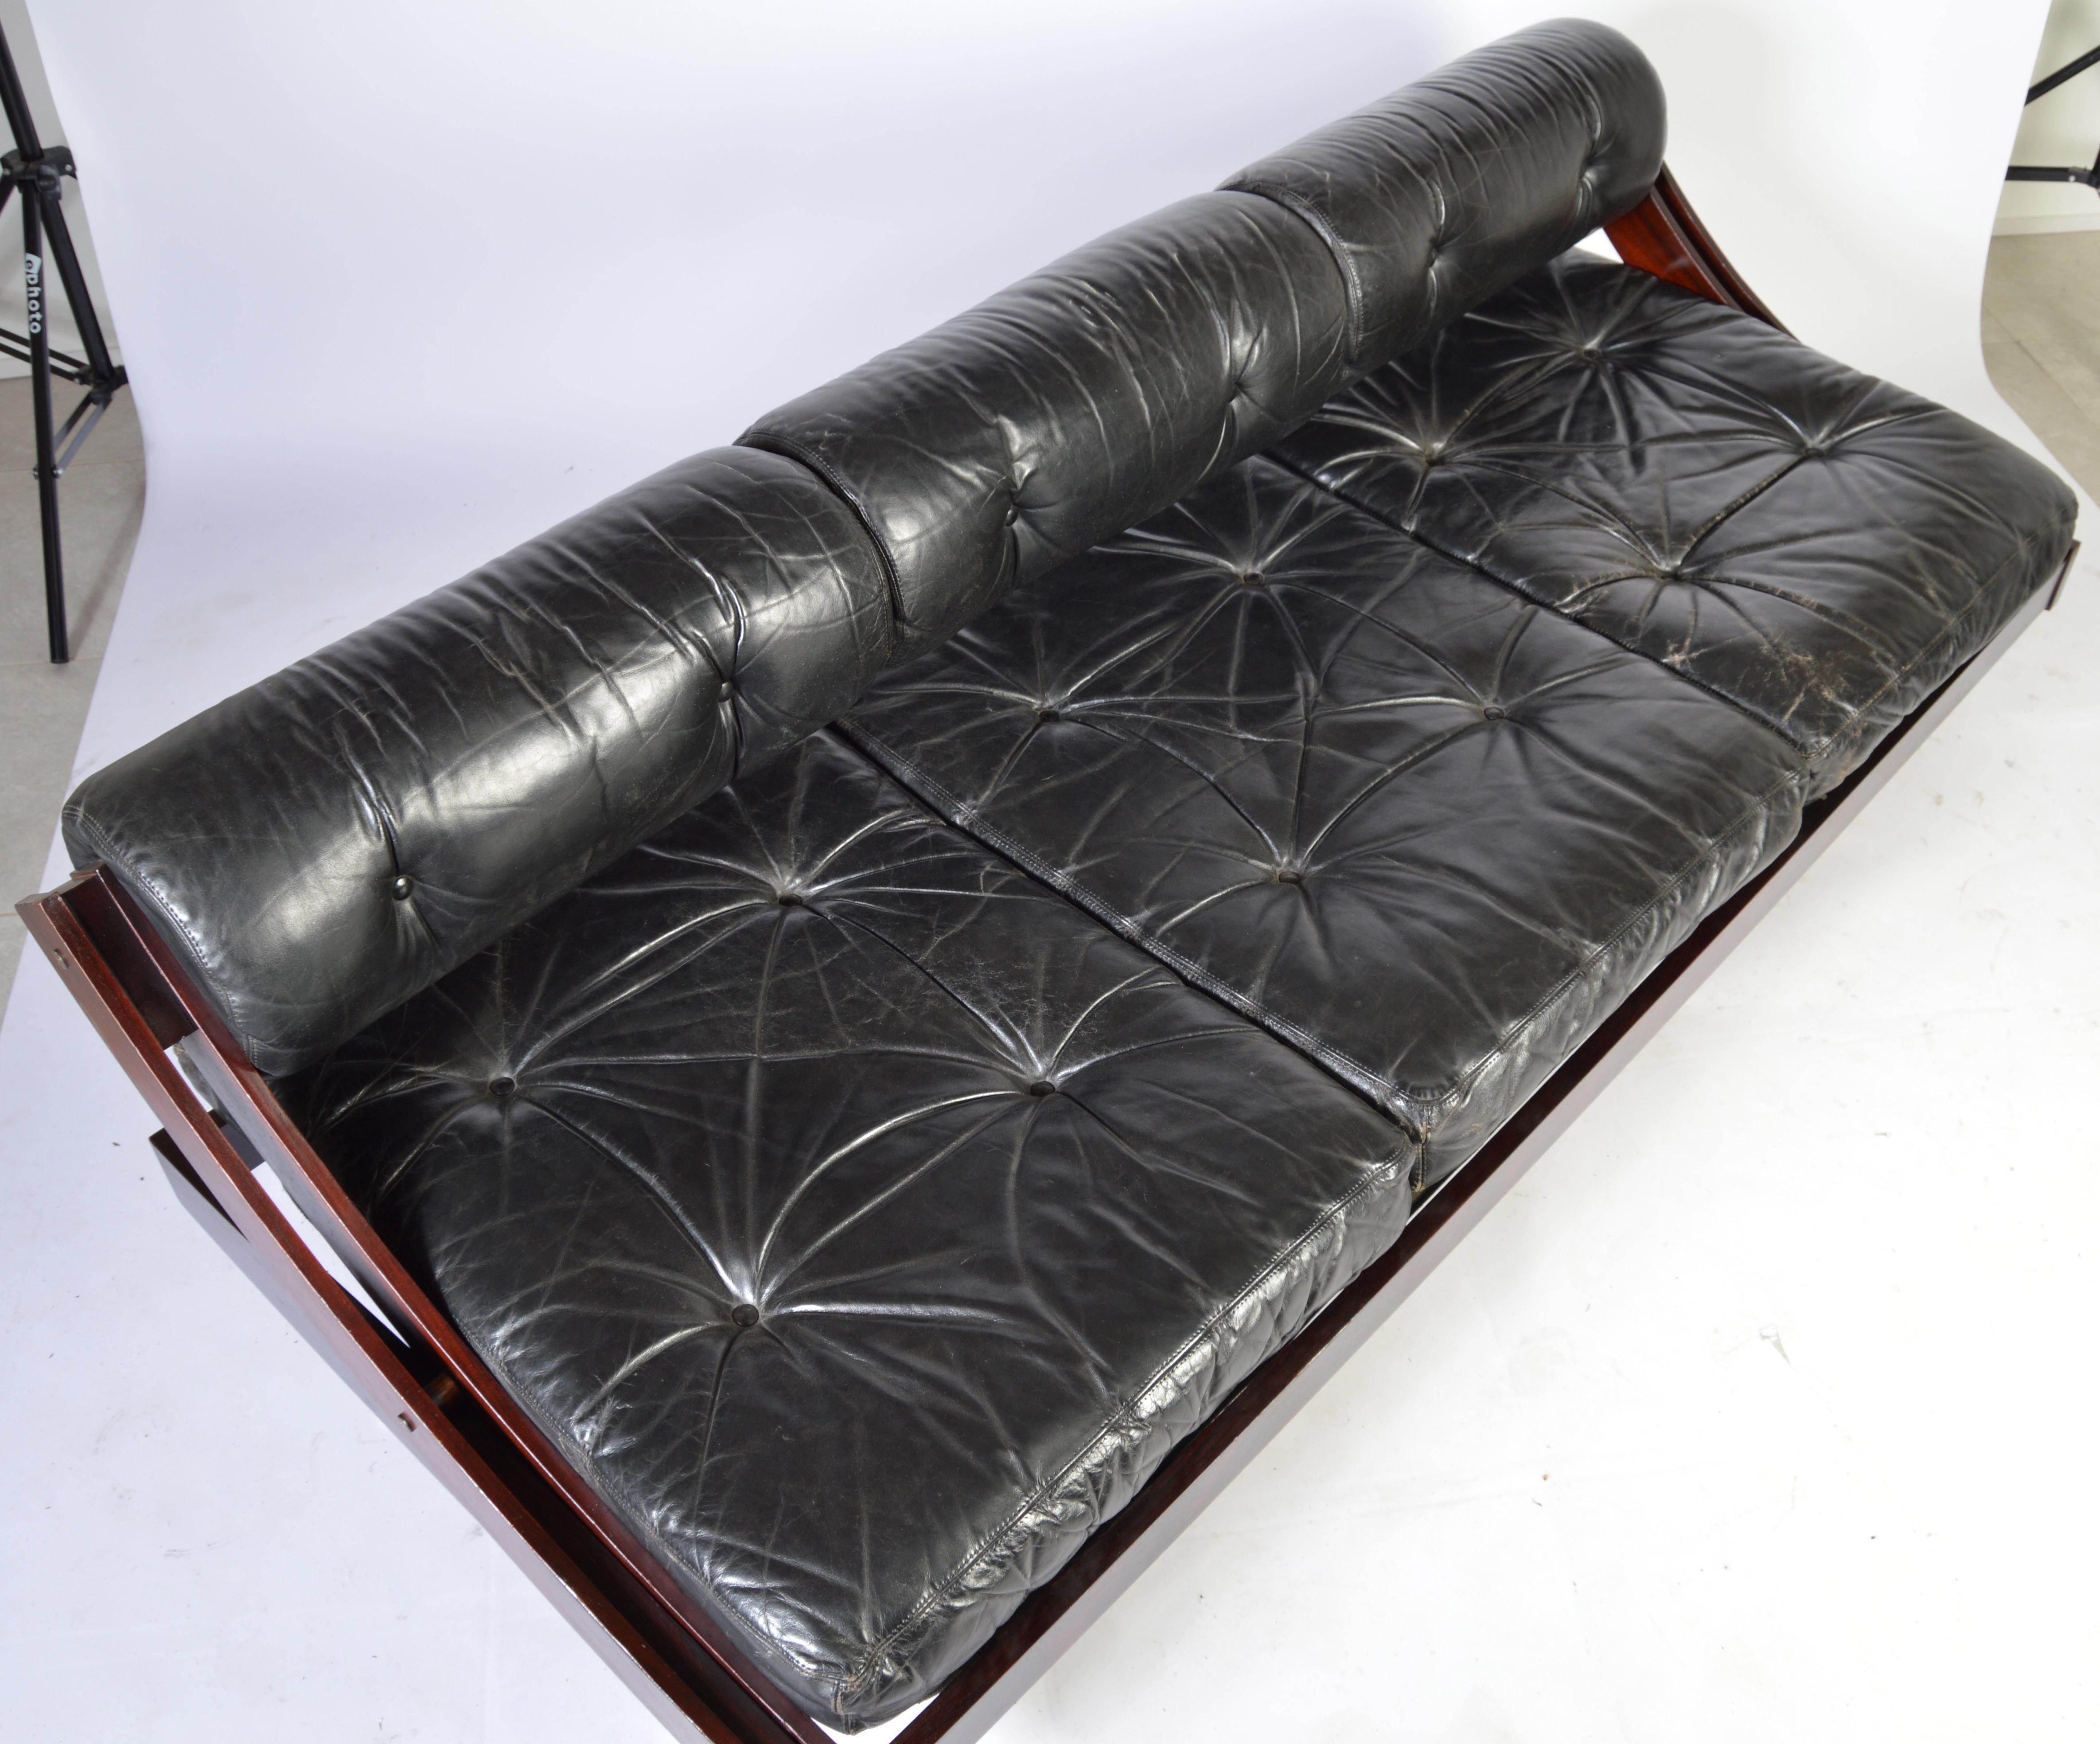 A beautiful midcentury Italian design by Gianni Sormani and produced by Sormani. This daybed features an adjustable backrest leaving a flat bed surface or locked into the upright position for the sofa version. Extremely comfortable Italian leather